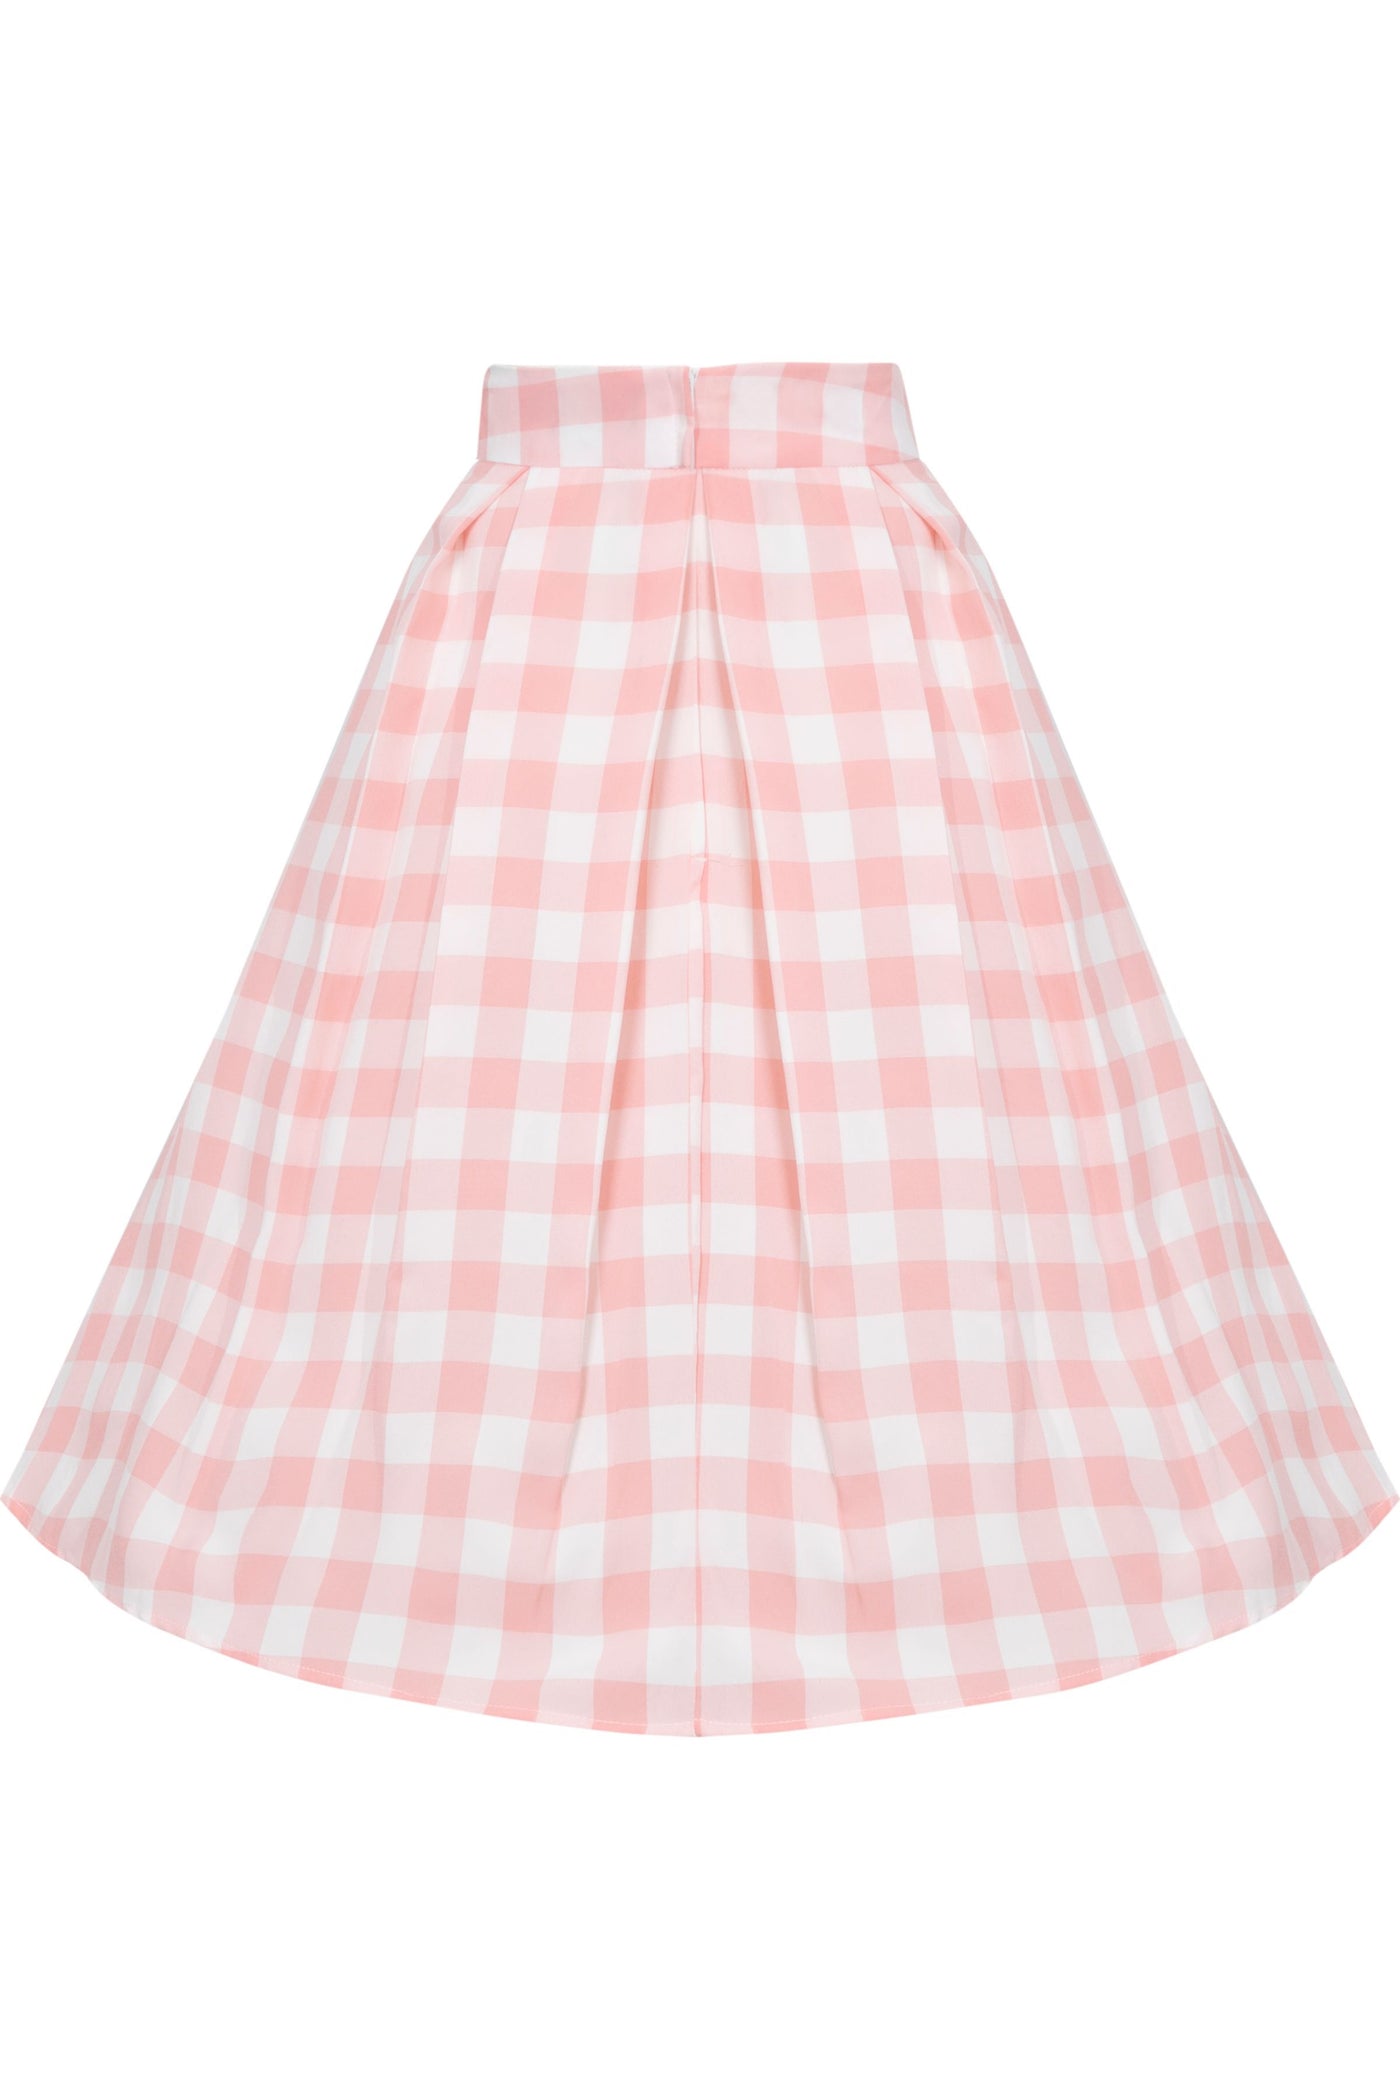 Carolyn Box Pleat Swing Skirt in Pink Gingham Check